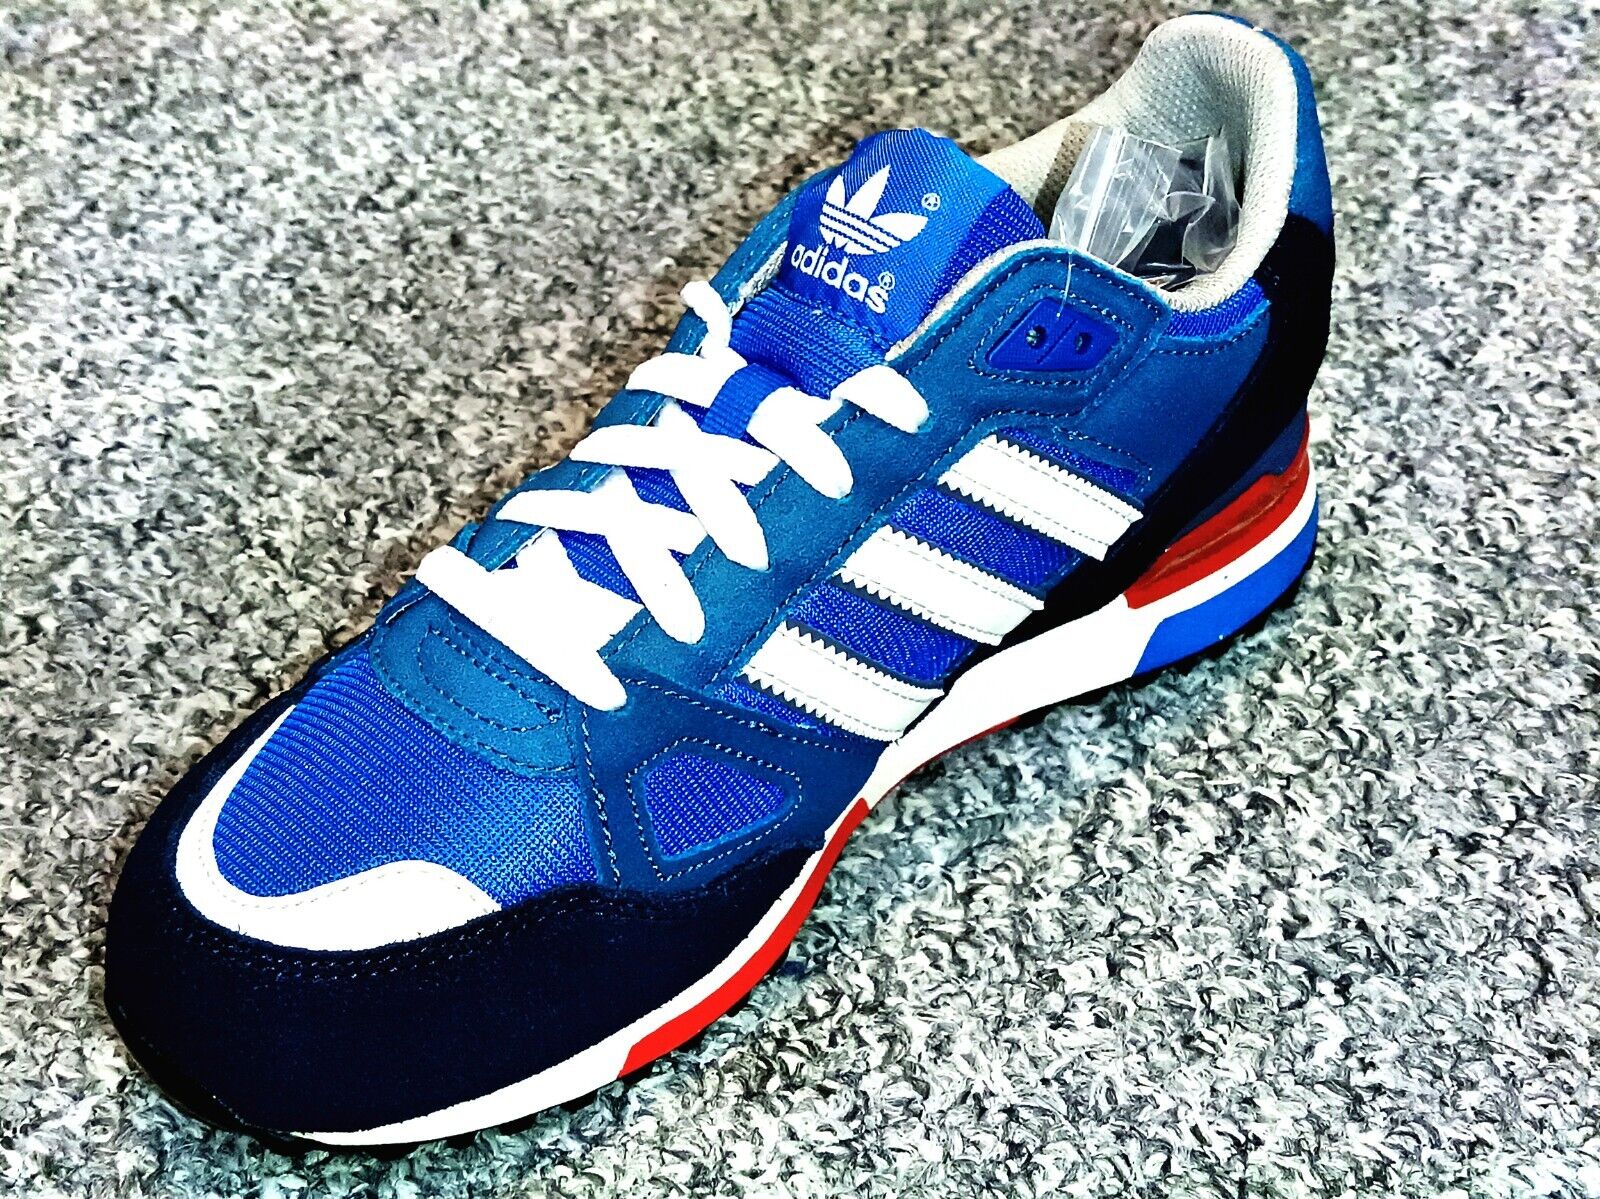 Adidas Originals ZX 750 G96718, UK Mens Shoes Trainers Sizes 7 to 